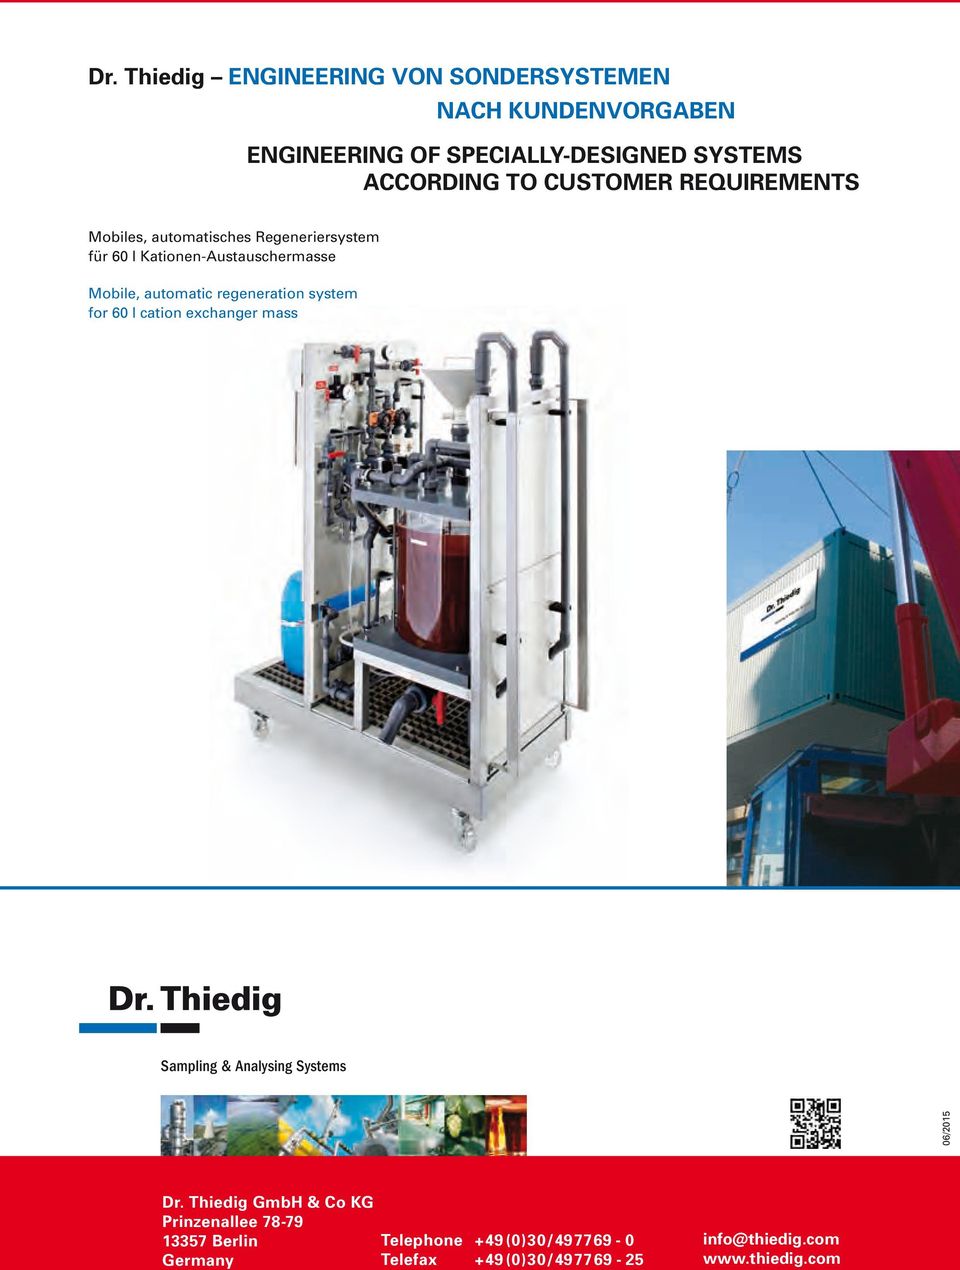 regeneration system for 60 l cation exchanger mass Sampling & Analysing Systems 06/2015 Dr.